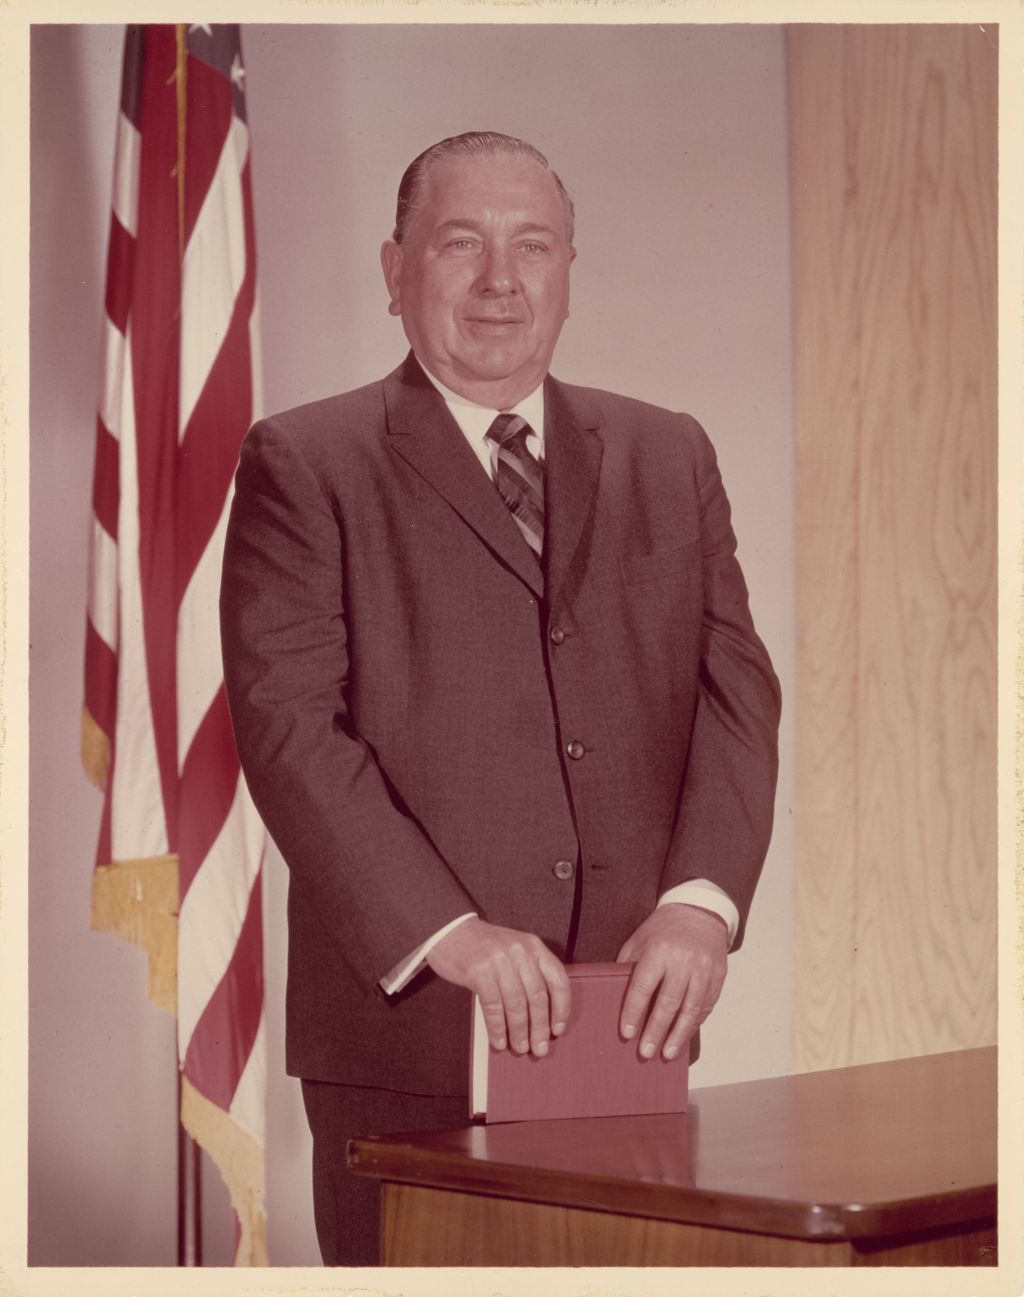 Miniature of Richard J. Daley with a book and a flag